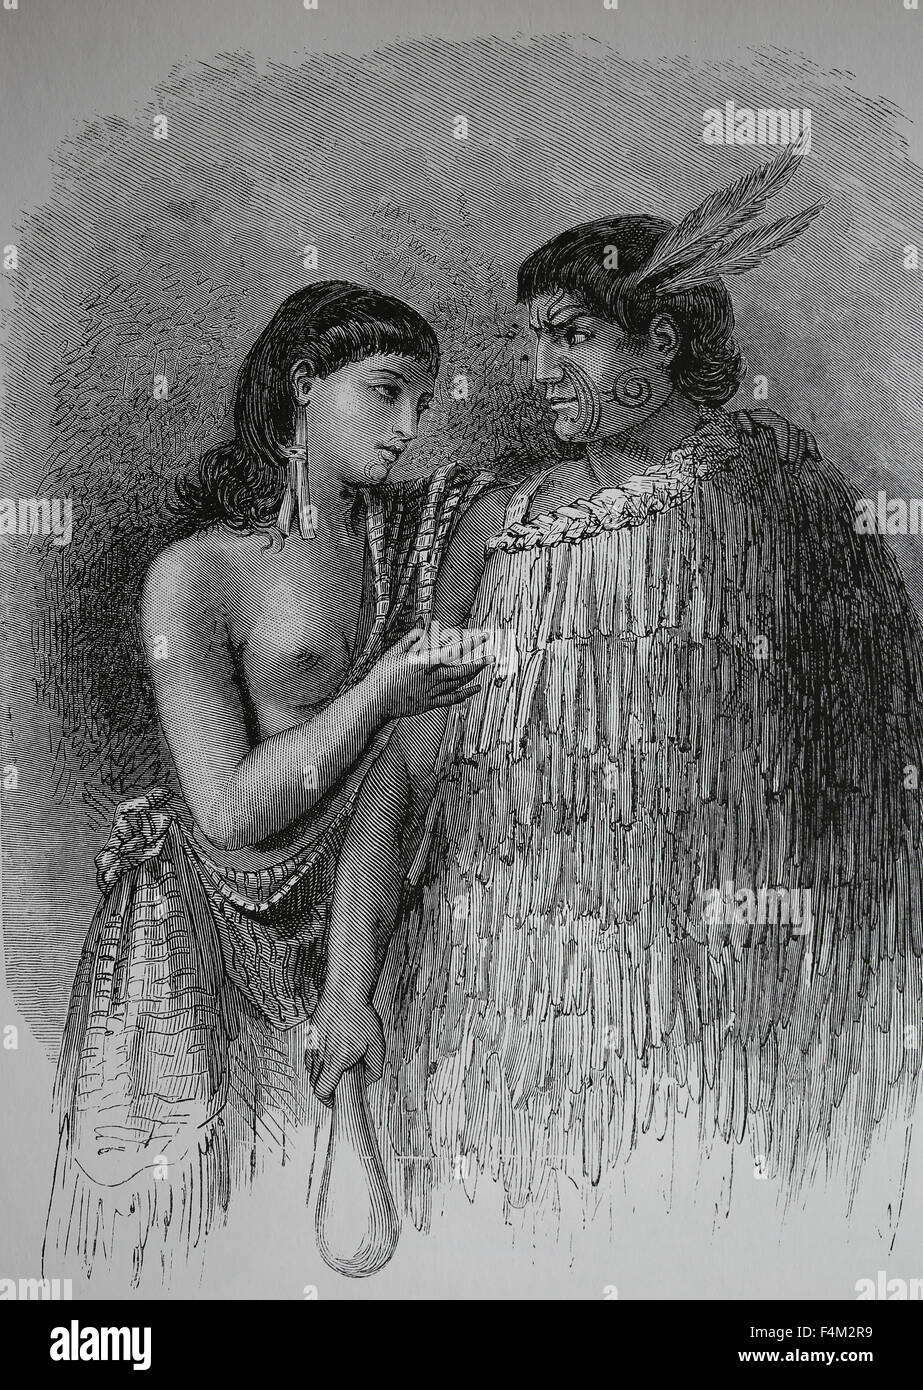 Pacific Islands. New Zealand. A Maori chief with his wife, 1880. Engraving. Stock Photo